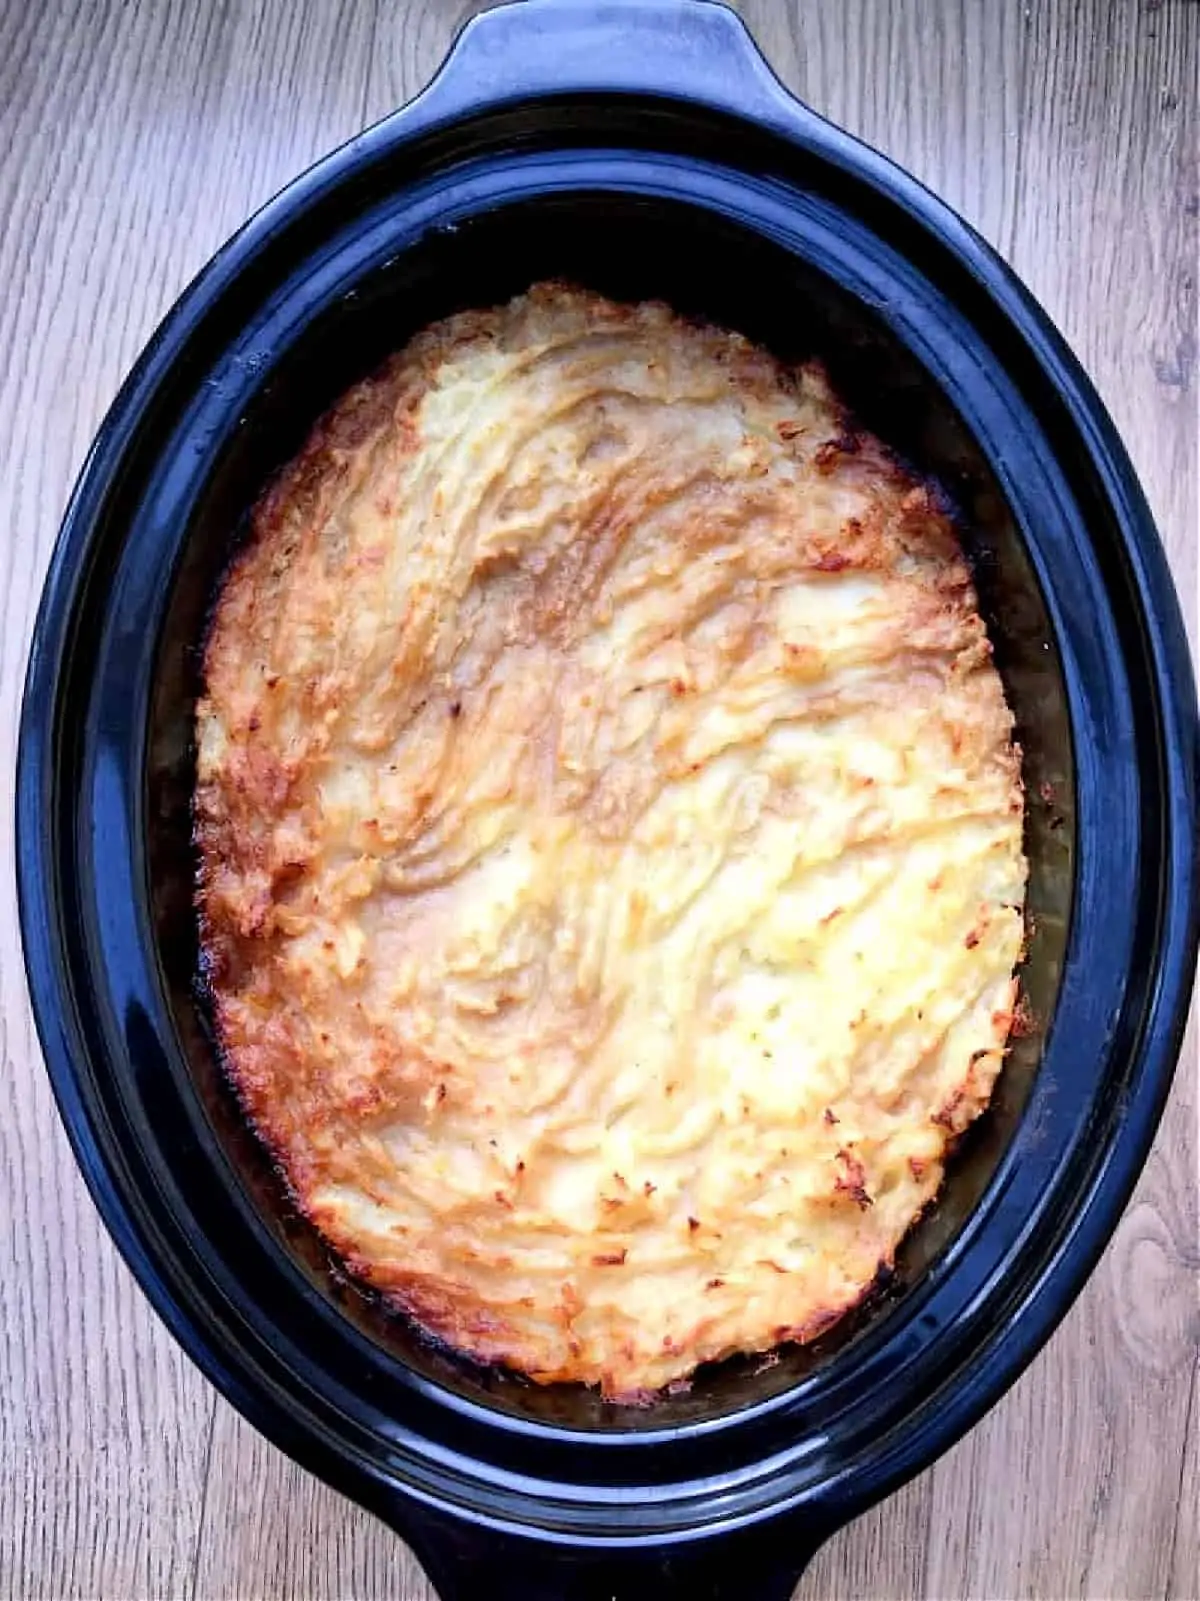 View of cottage pie with browned top in slow cooker pot.